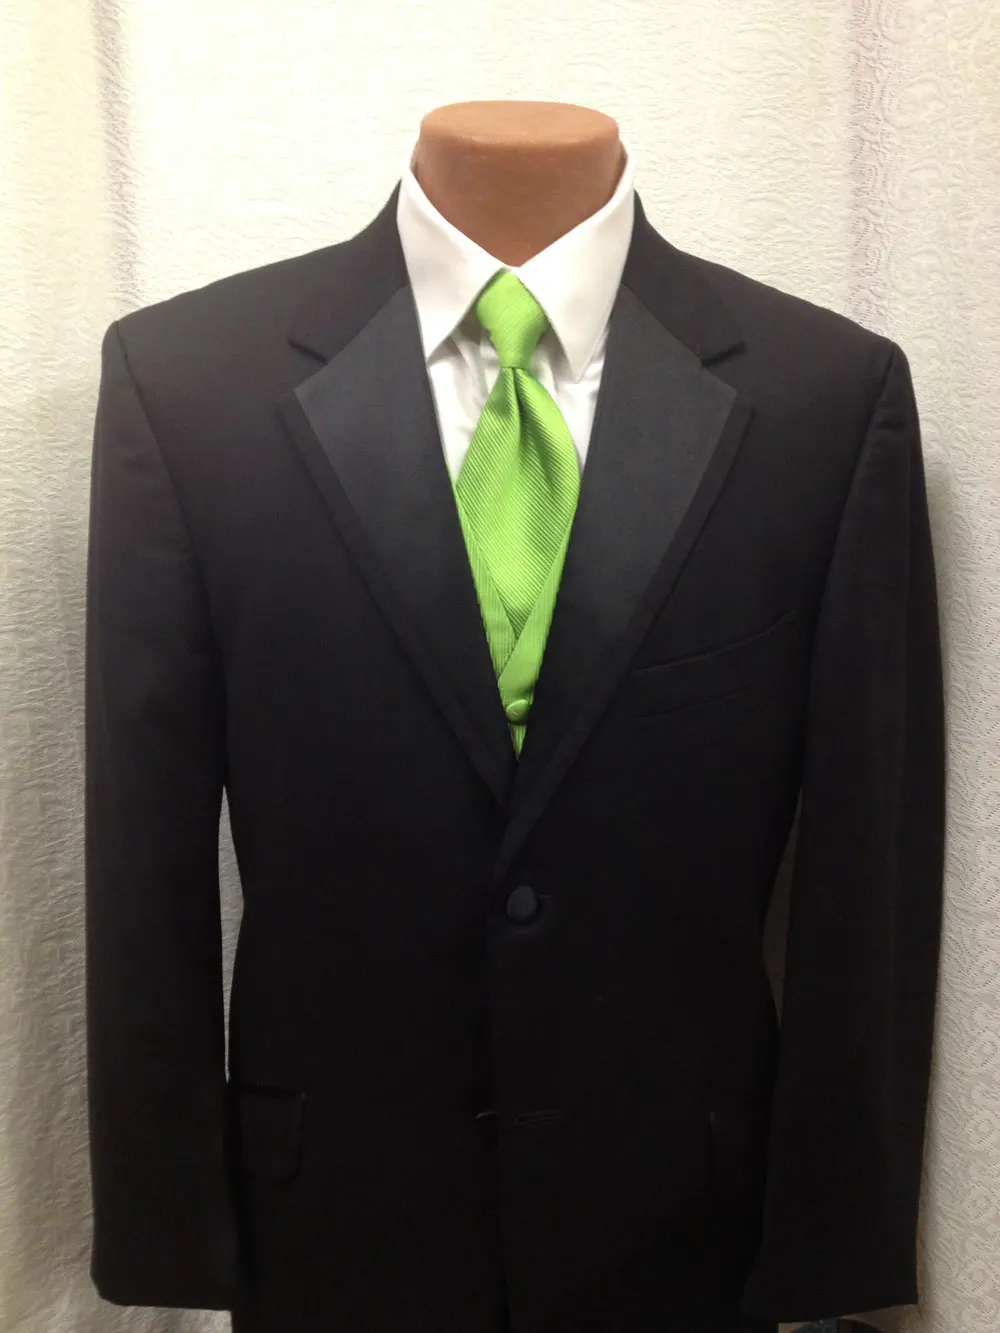 Read more about the article Suit vs. Tux: Is There Really A Difference?